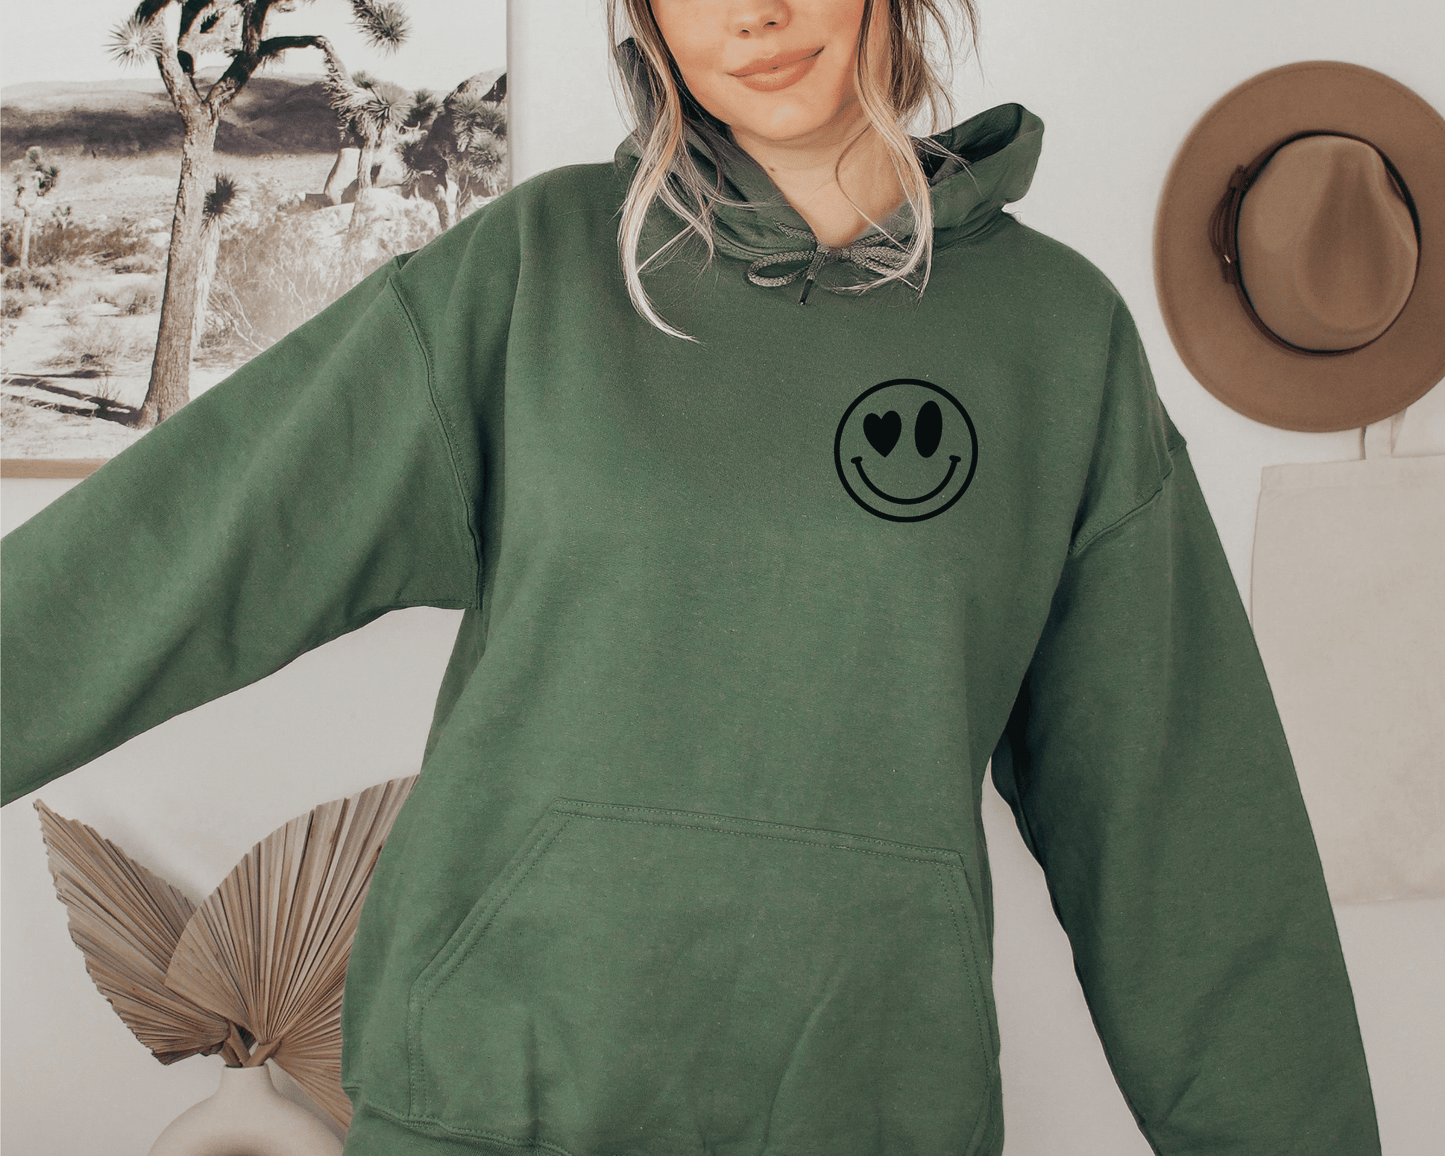 Grow with the Flow Hoodie in Military Green, front of hoodie.